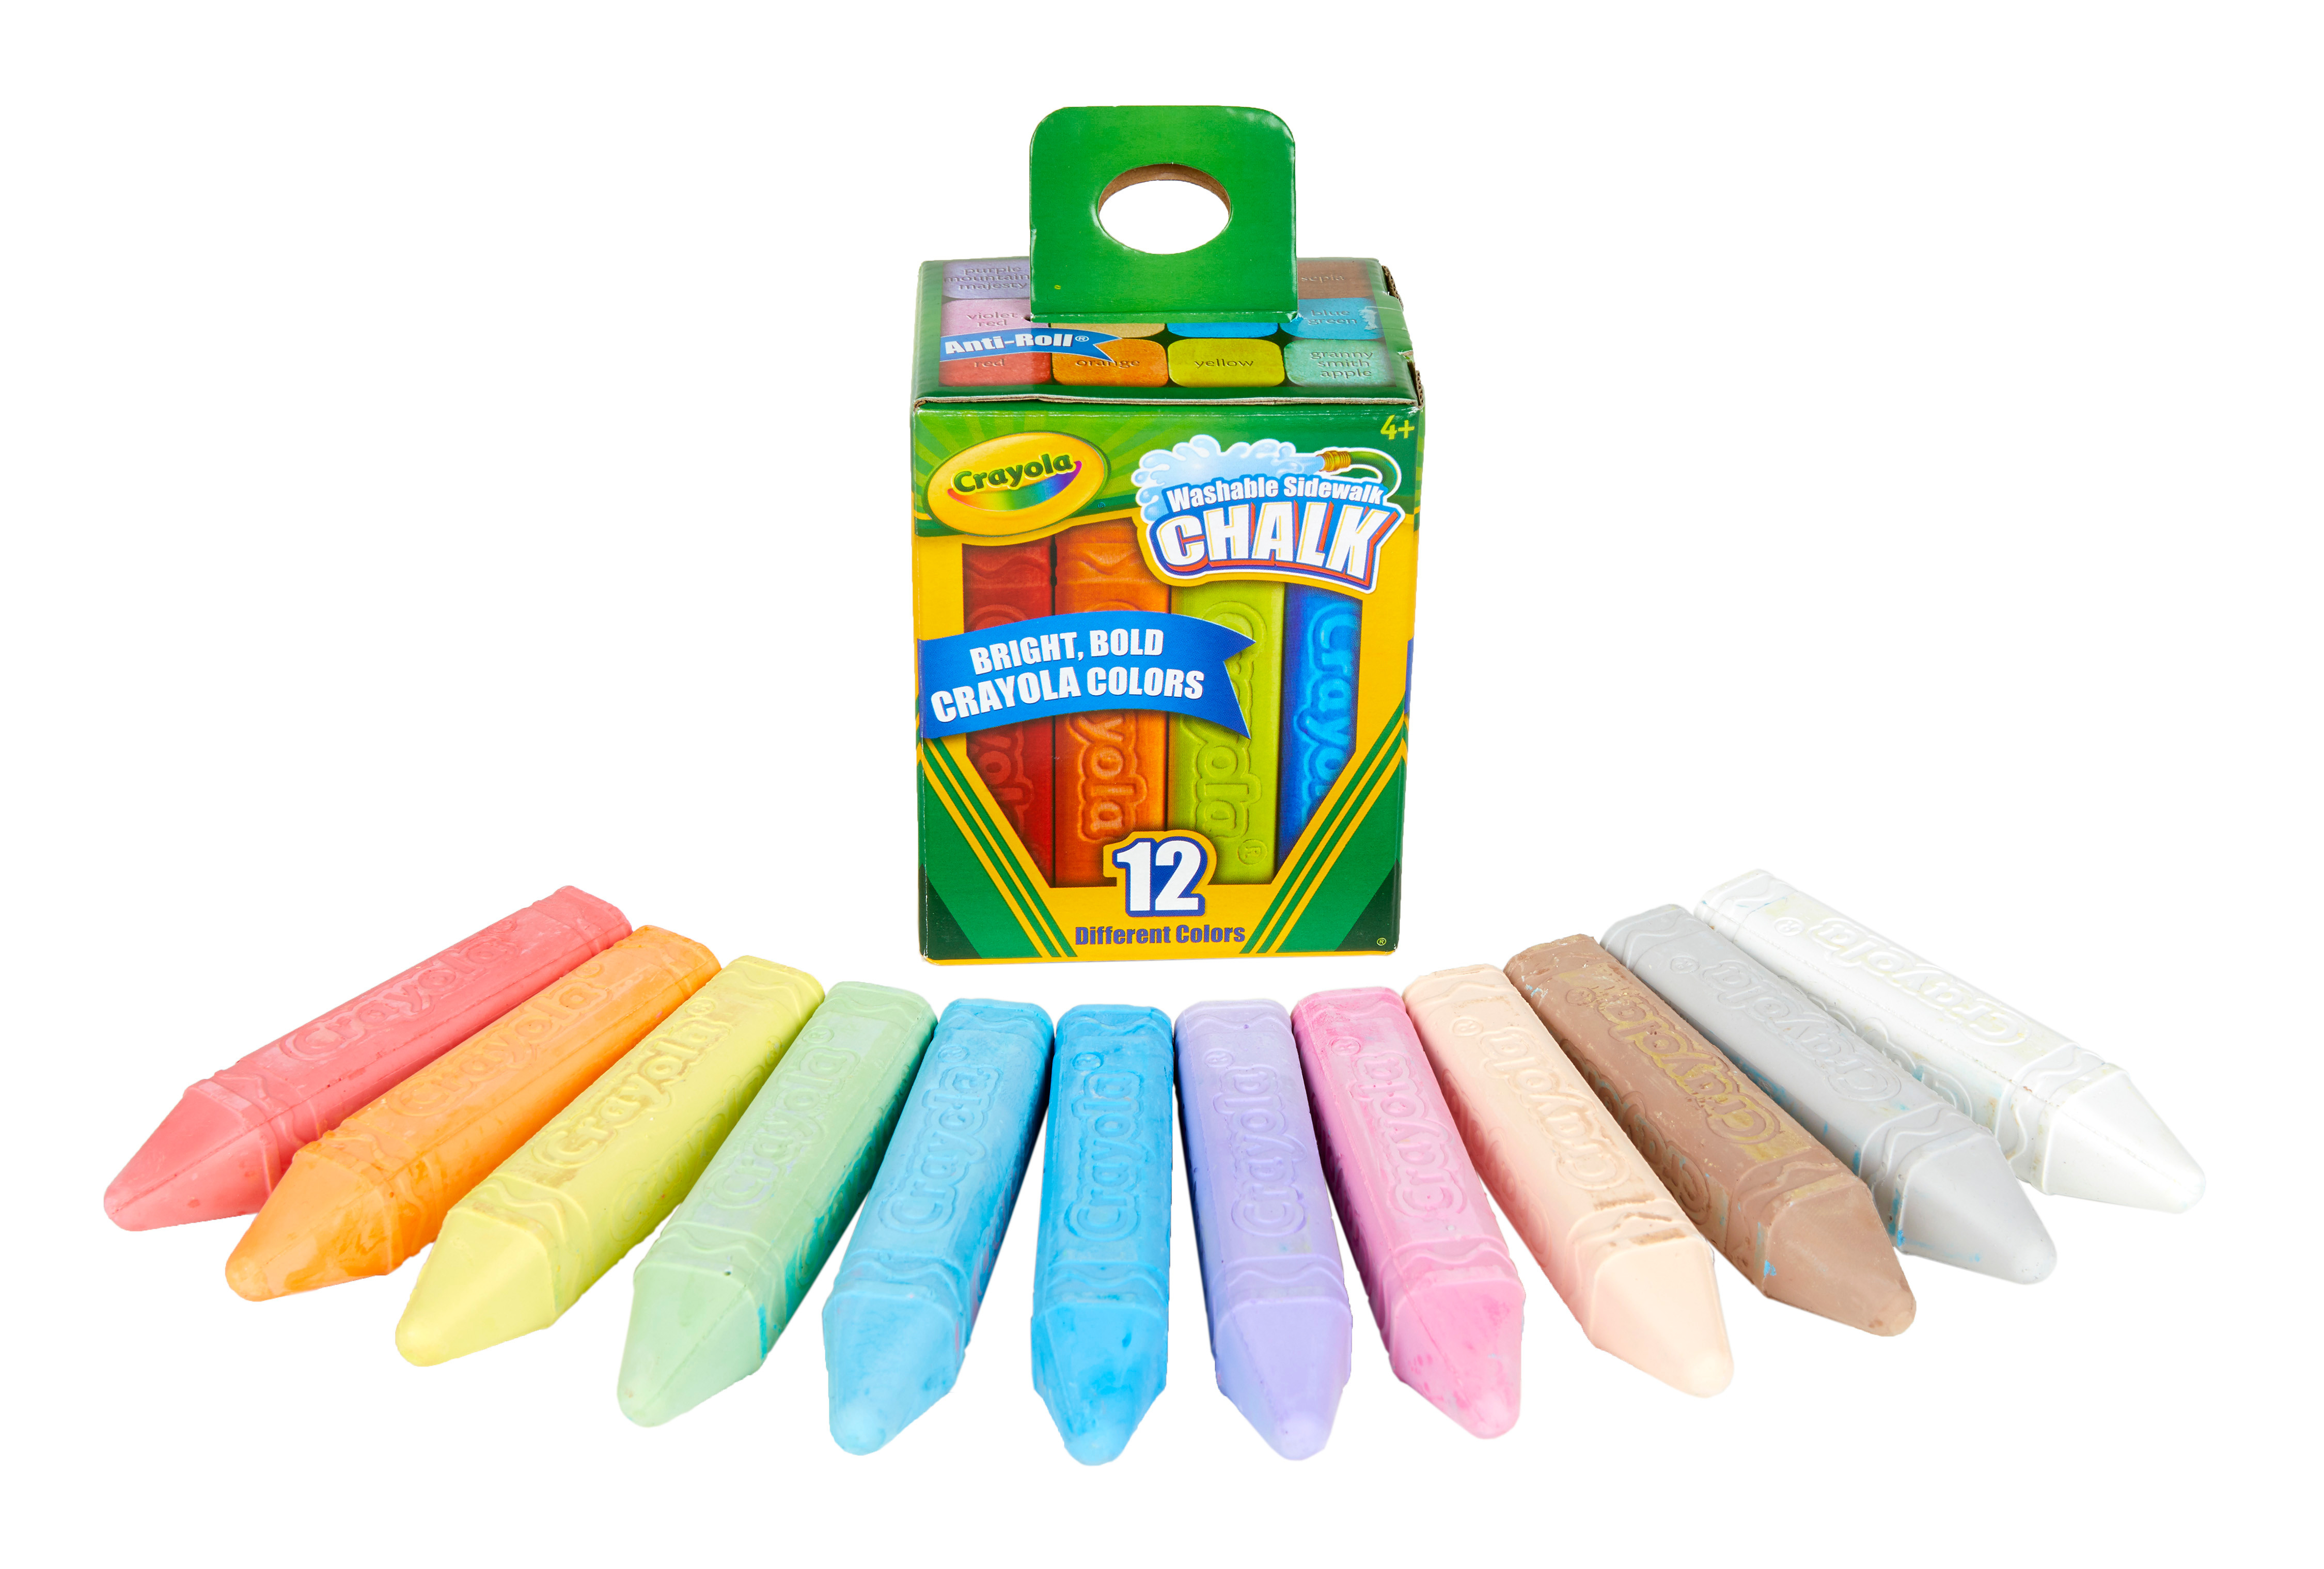 Crayola Outdoor Washable Sidewalk Chalk, 12 Count And Colors - image 5 of 8